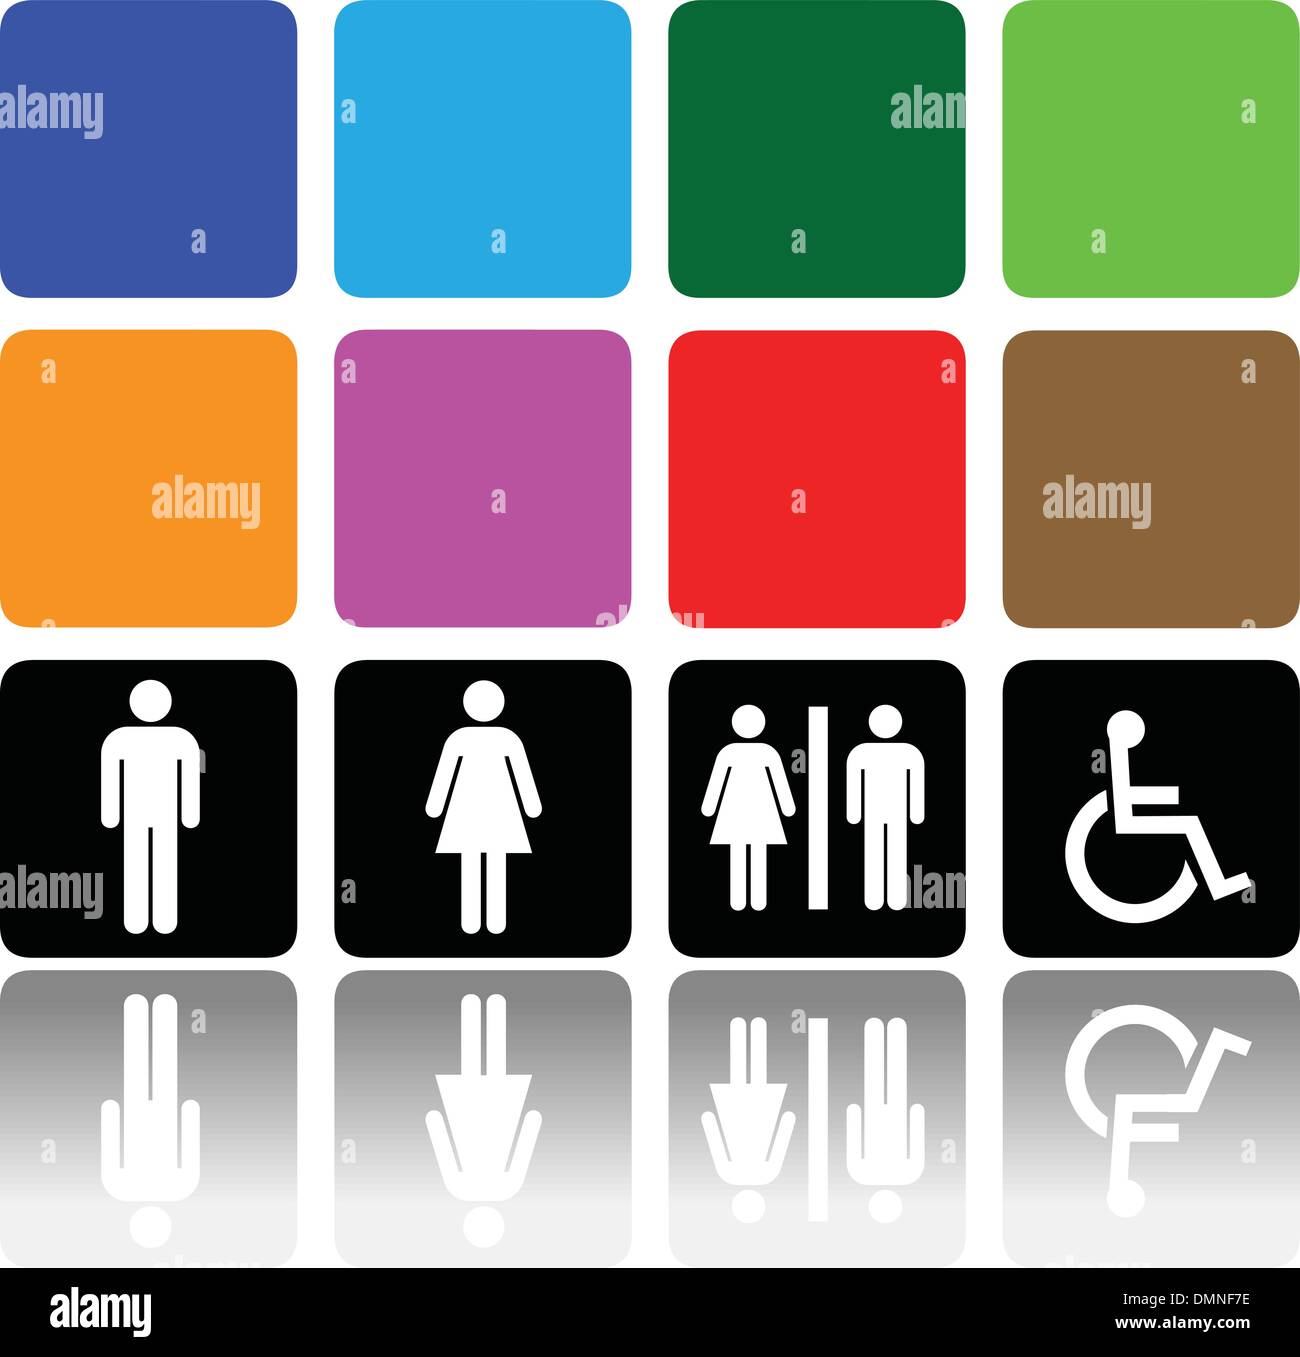 toilet signs, man and woman Stock Vector